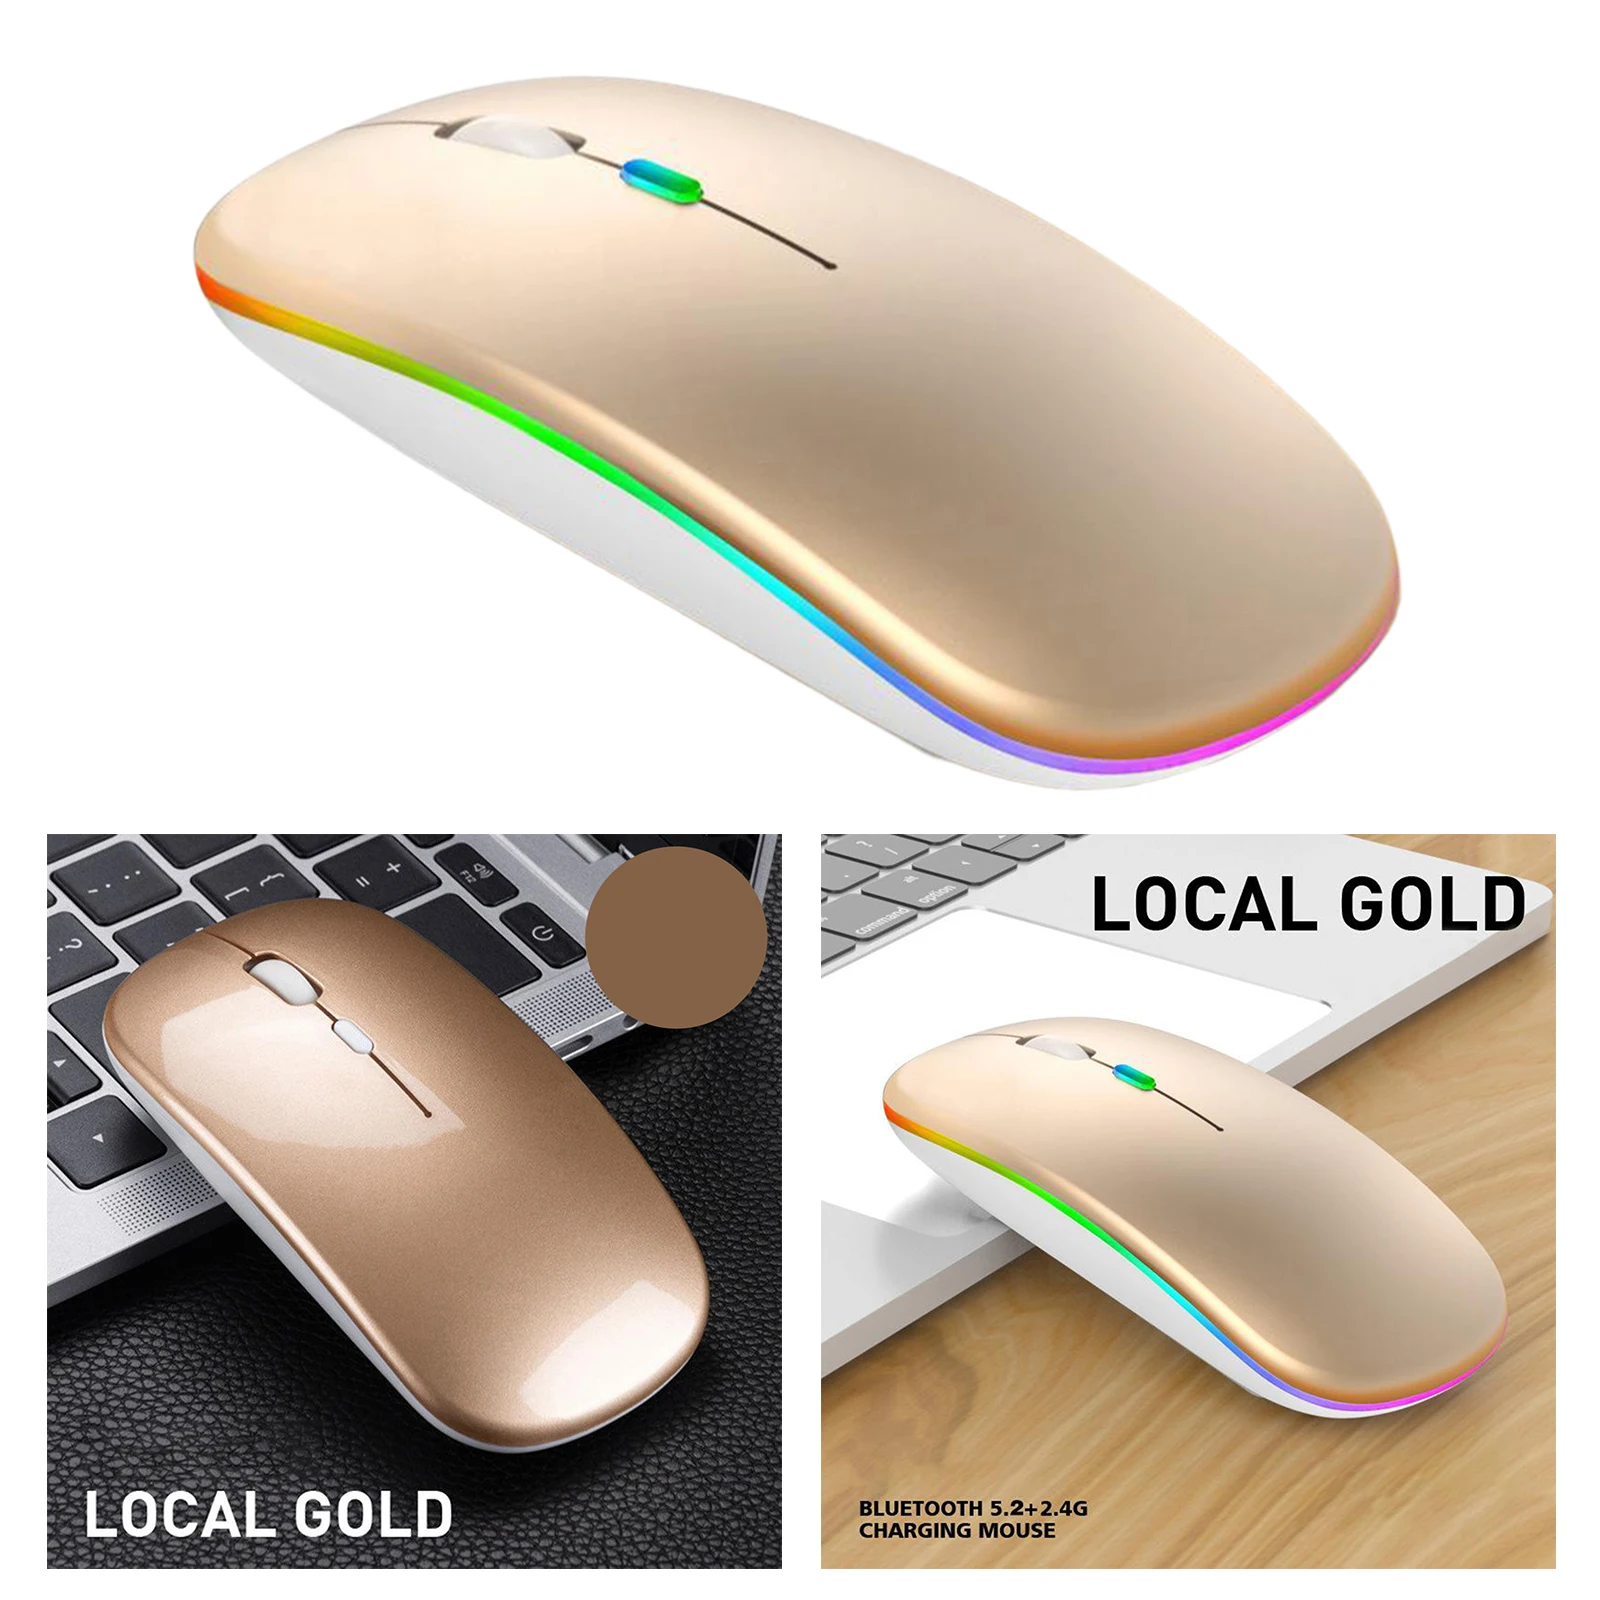 Slim Silent 2.4G LED Wireless Mouse Rechargeable Mobile Optical Laptop Mouse